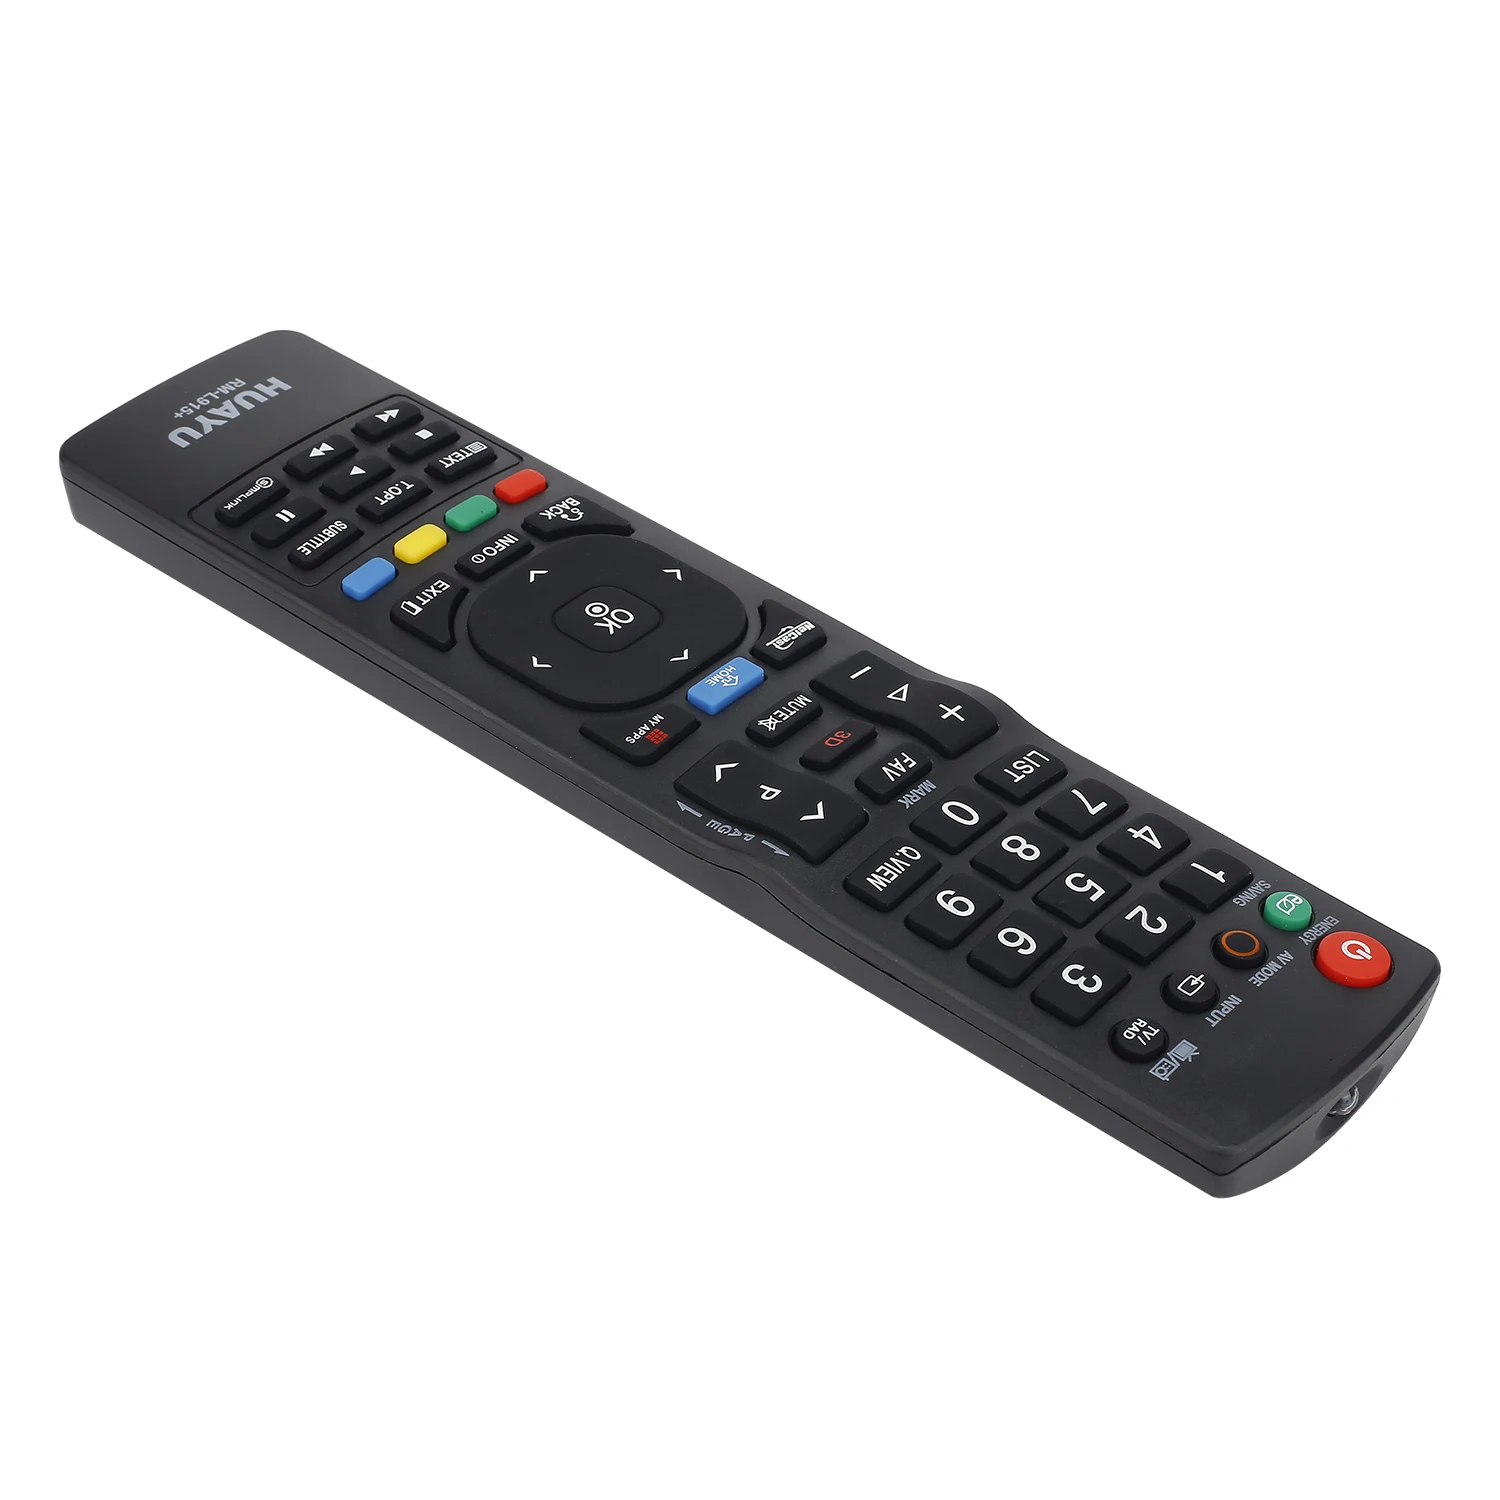 Hotsmtbang Replacement Remote Control for LG 42CL40 37LV3500 47LV3700 47LX6500 47LV5500 47LK520 42LV3500 42LV4400 42LK450 42LH55 55LM4700 47LM4600 20LA6R DU-27FB32C 32LH30 55LV3700 Plasma Smart HD TV